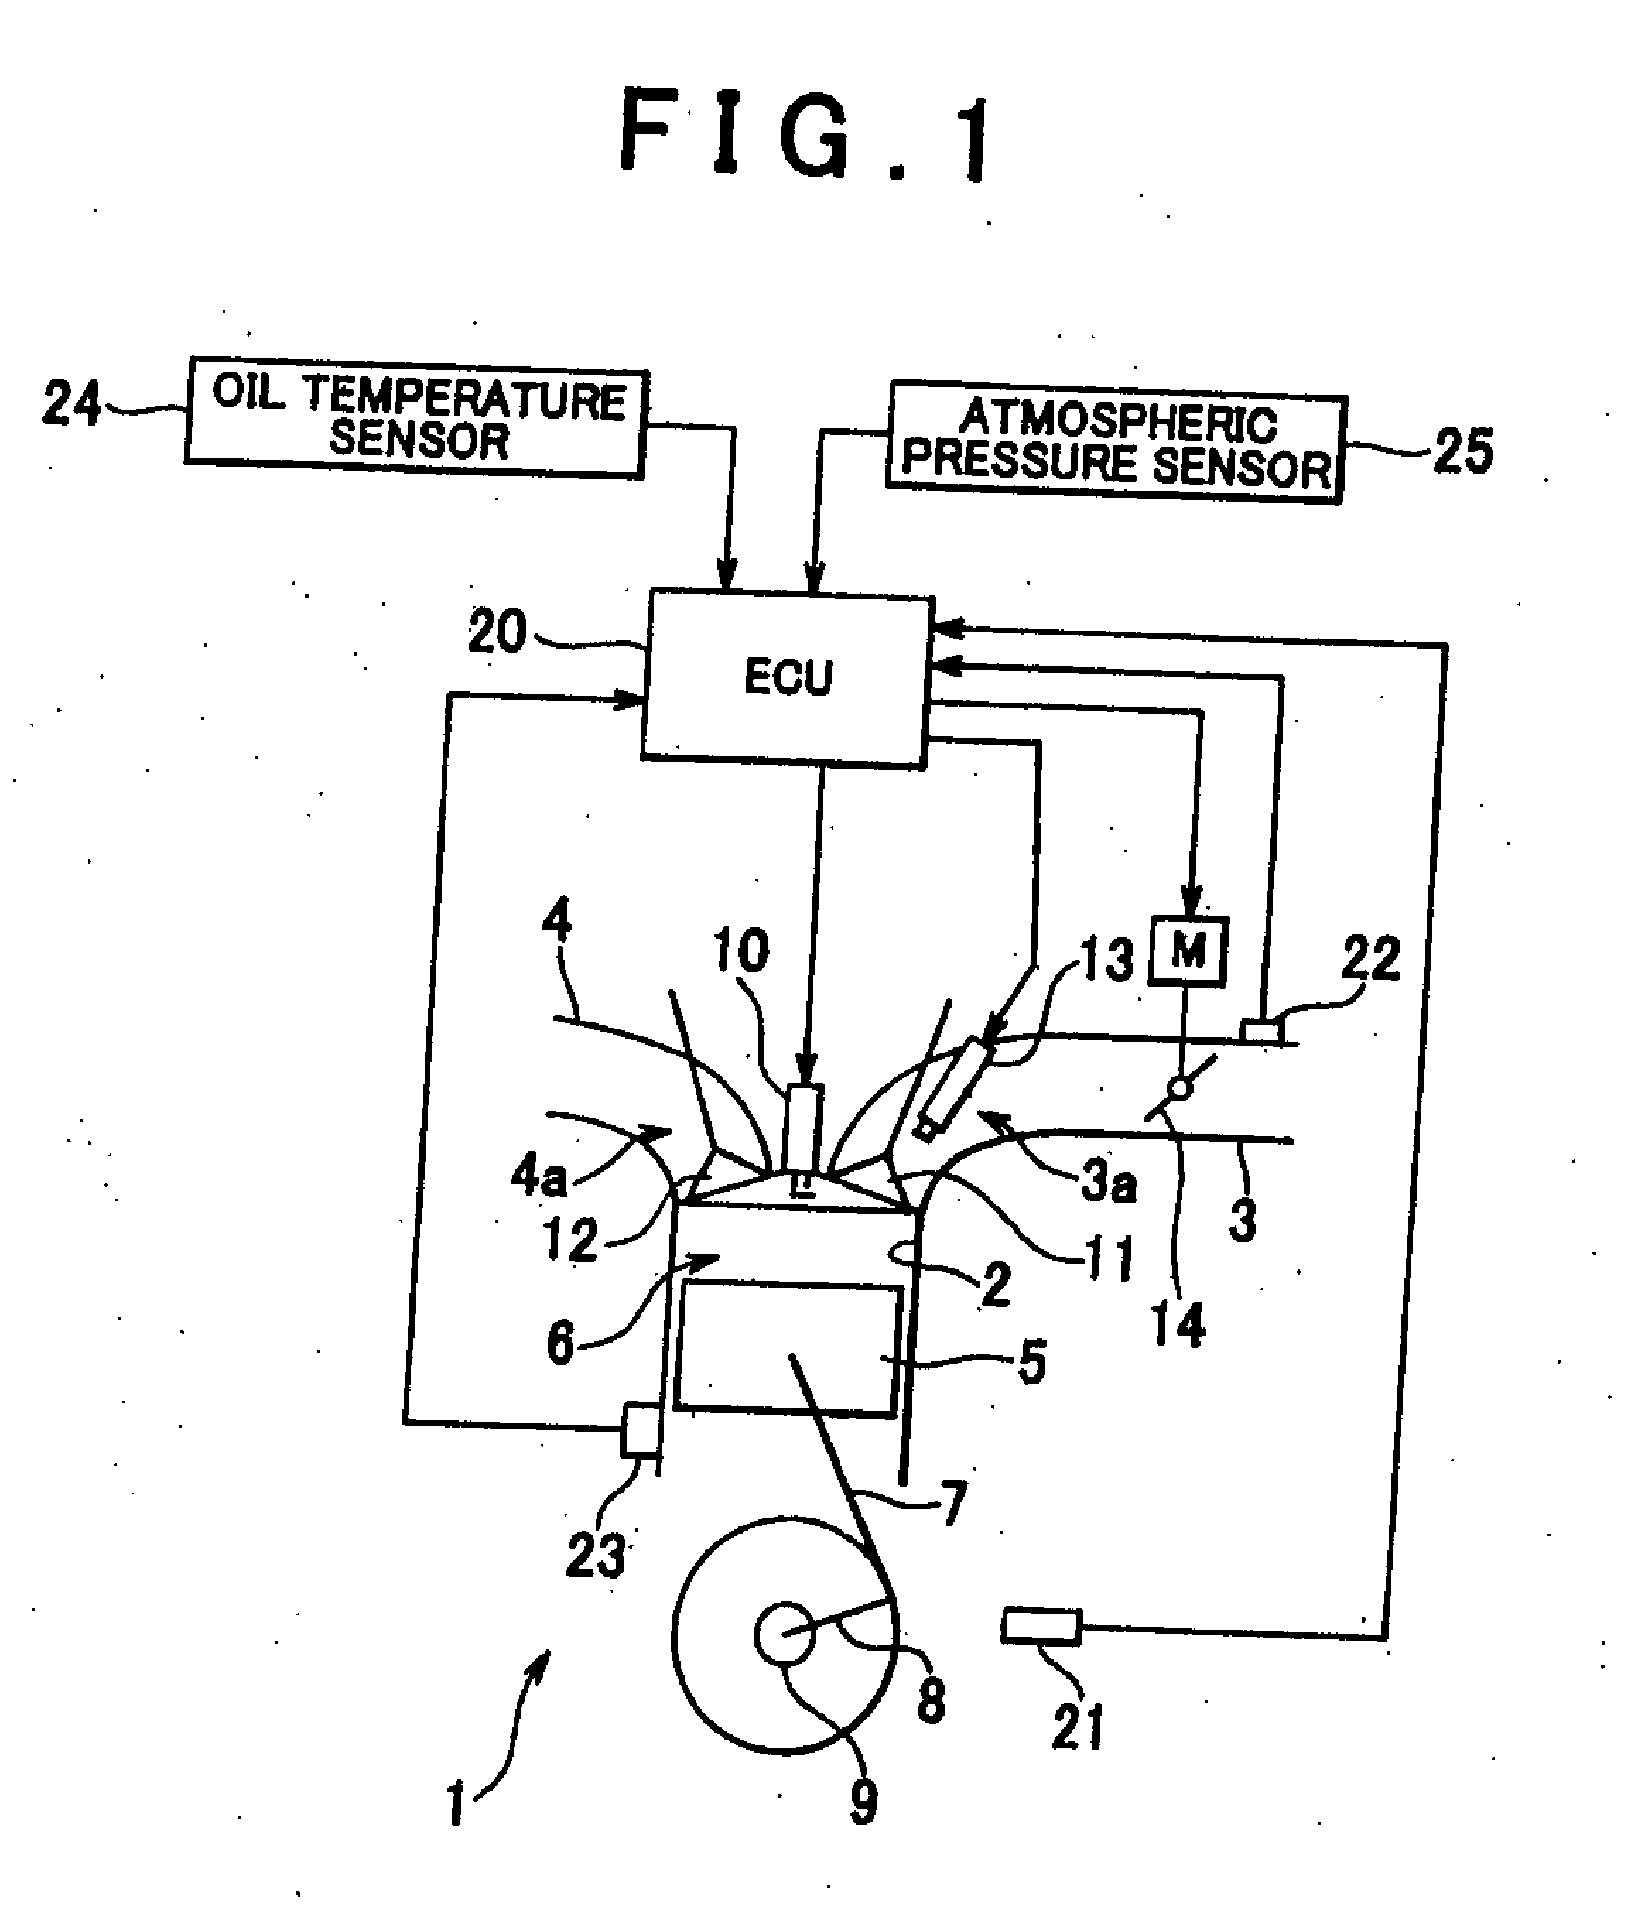 Stop-start control apparatus and method for an internal combustion engine